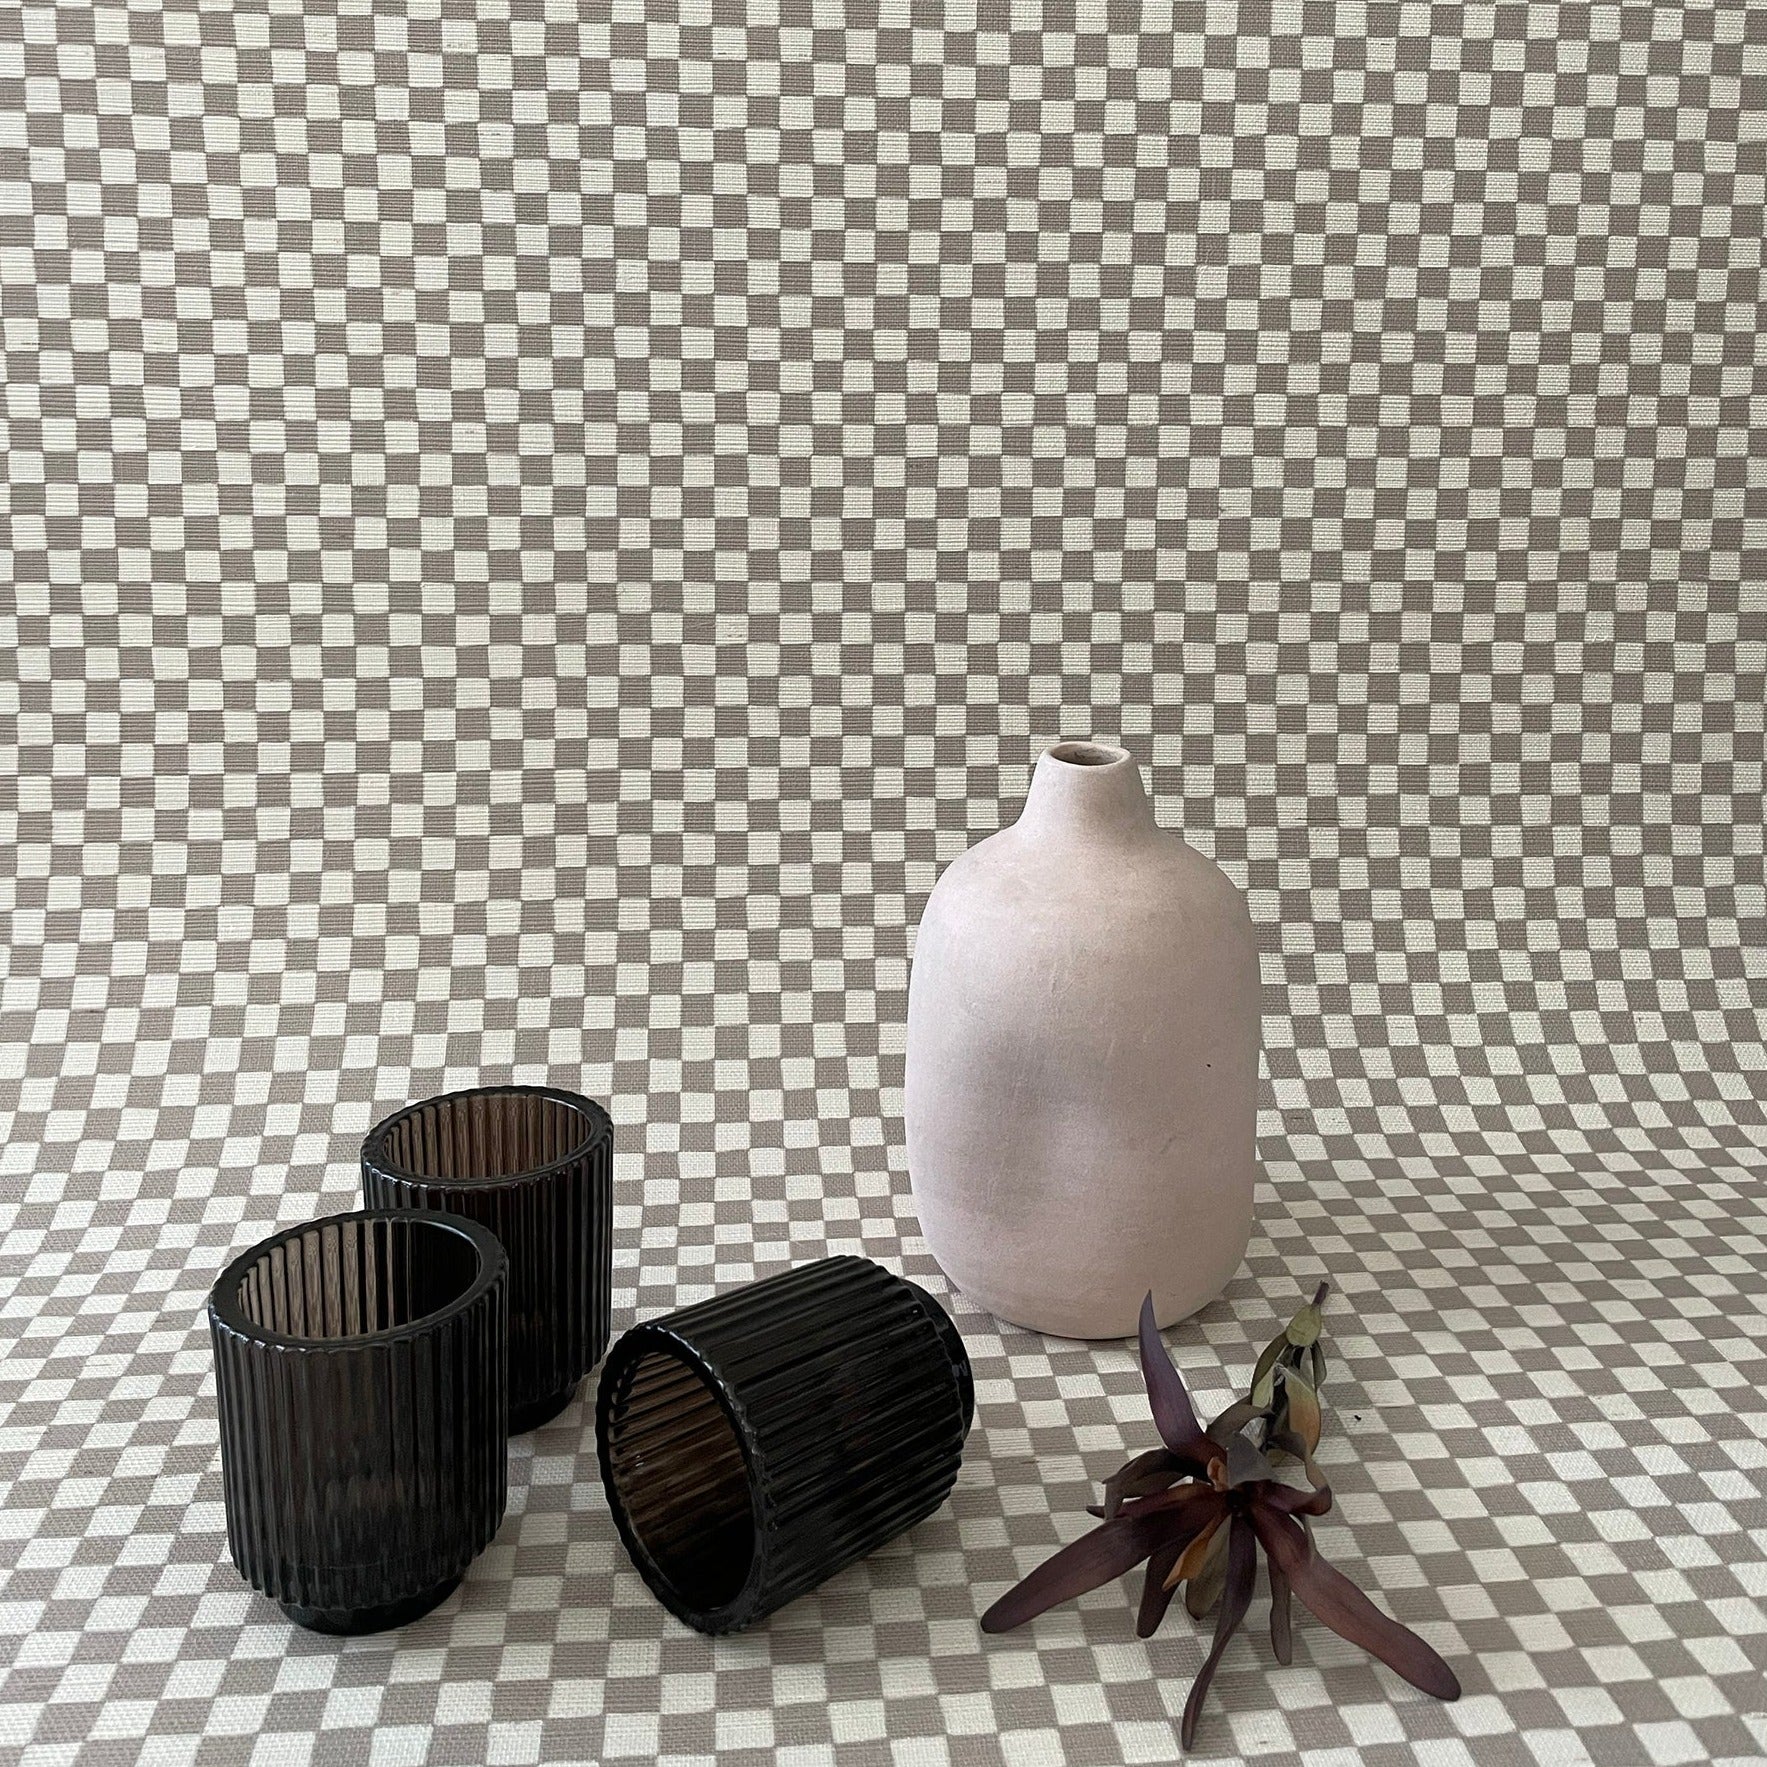 Taupe colored grasscloth wallpaper with vase and three glass candle holders